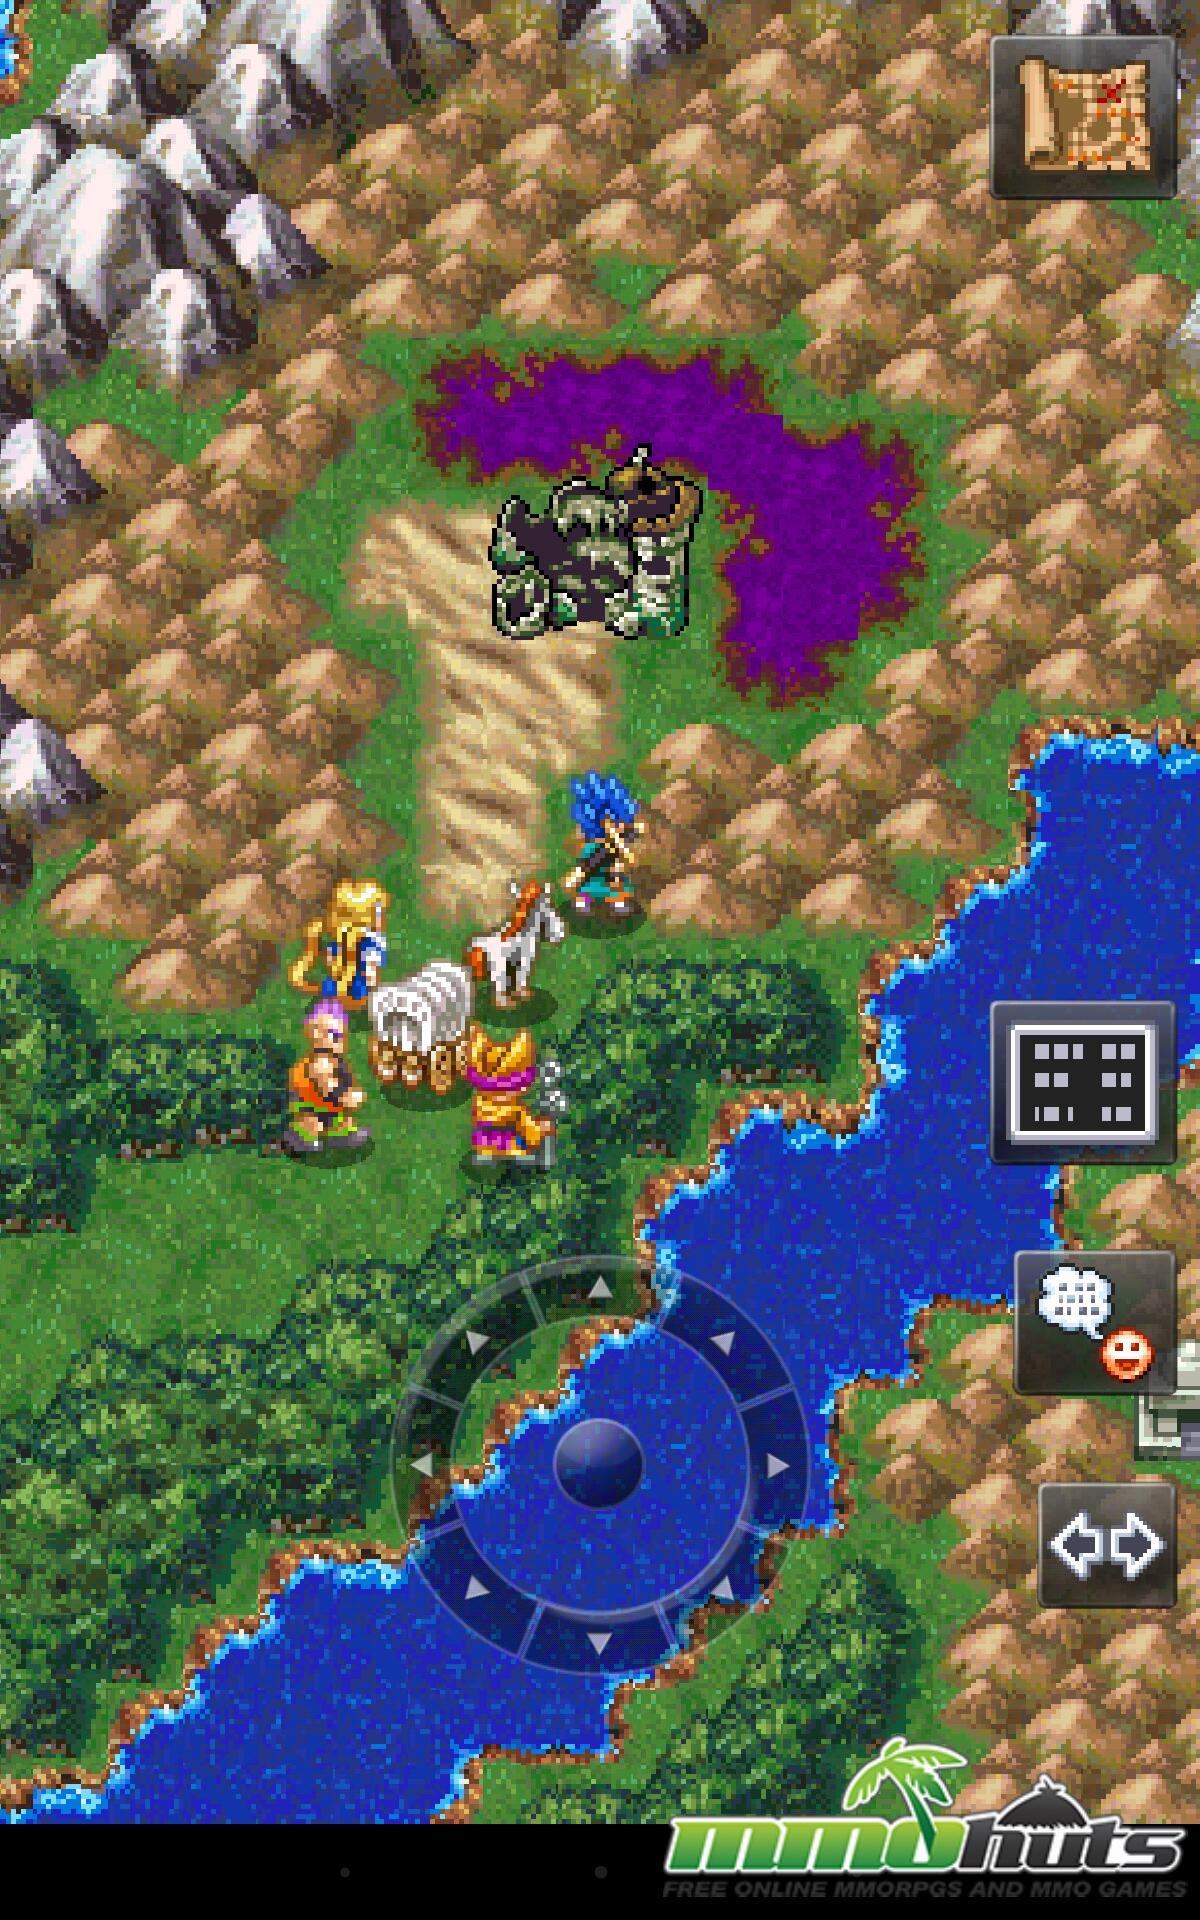 Dragon Quest VI: Realms of Revelation Now Available on 